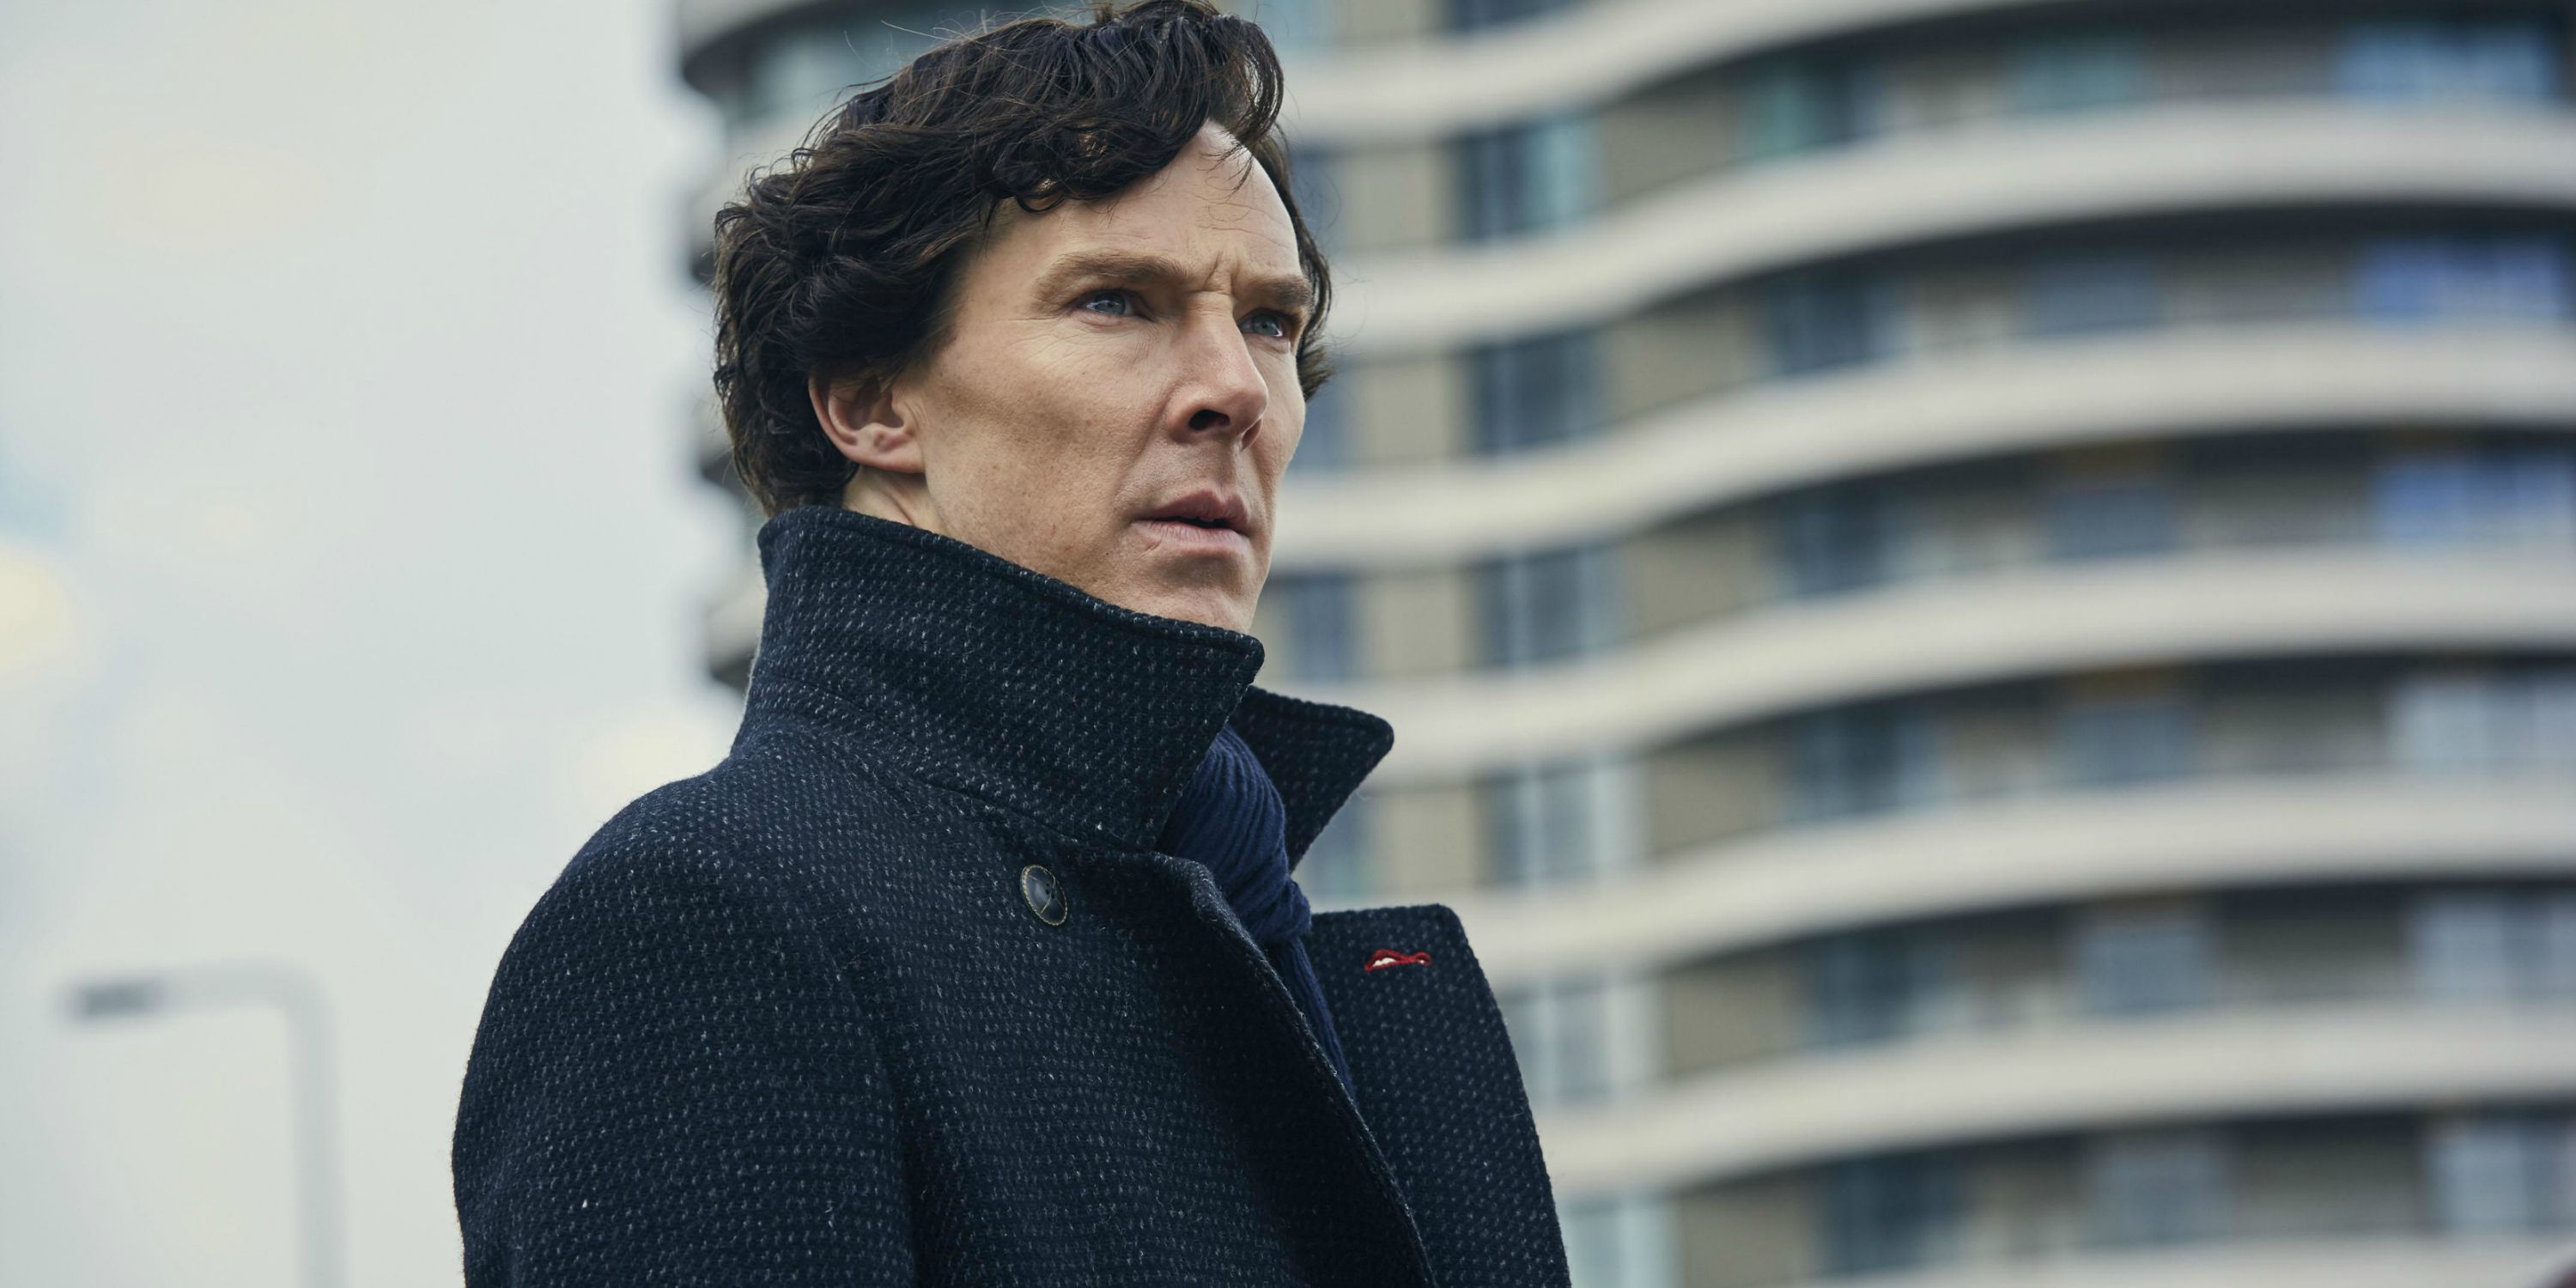 Sherlock Season 4 Finale Will Be More Action-Packed